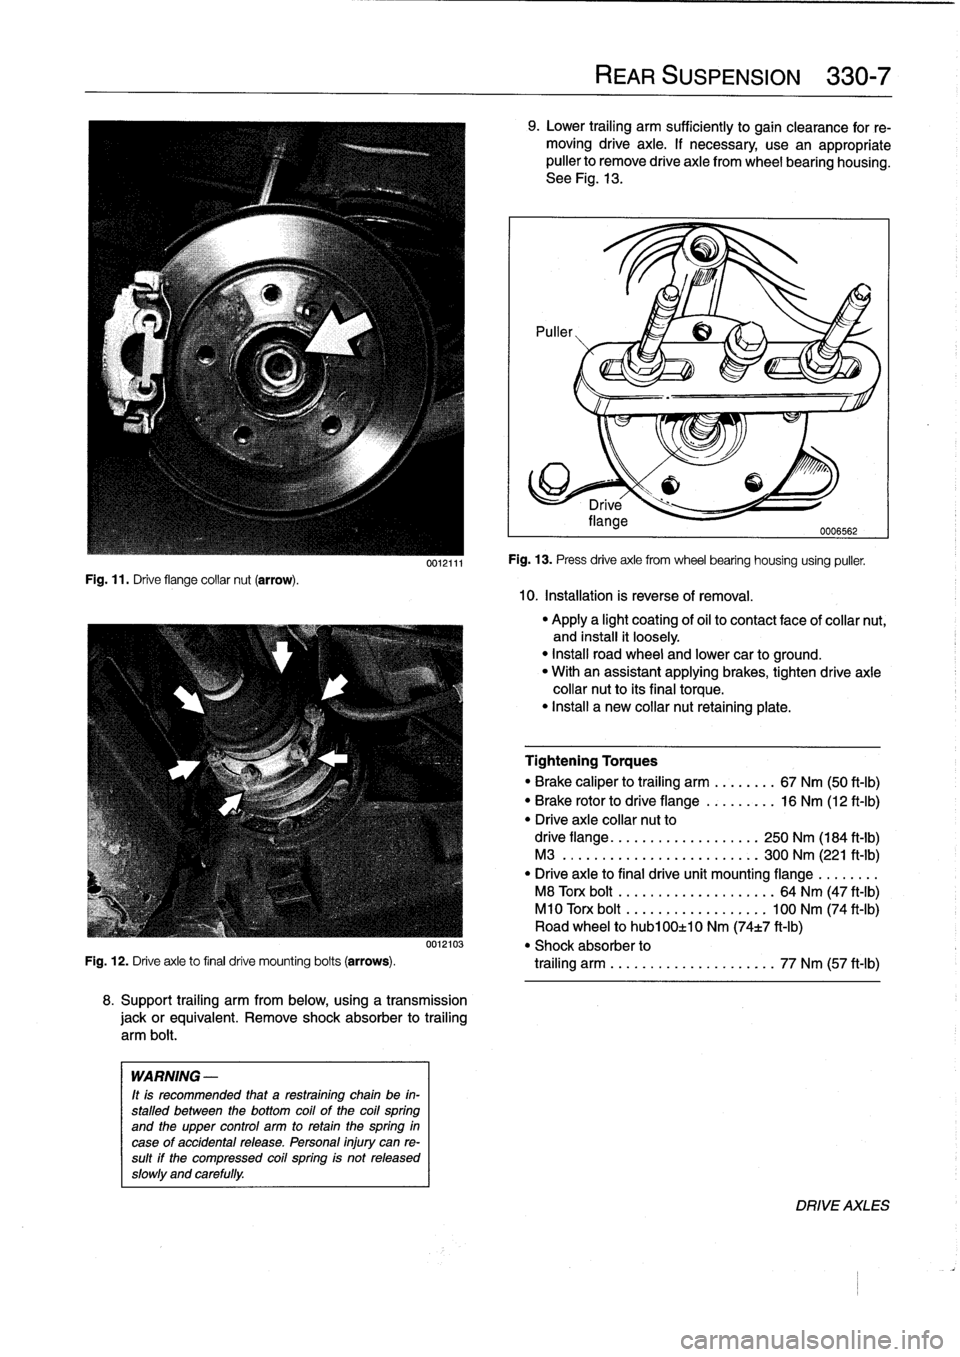 BMW 328i 1998 E36 Workshop Manual 
Fig
.
11
.
Drive
flange
collar
nut
(arrow)
.

0012111

8
.
Support
trailing
arm
from
below,
using
a
transmission

jackorequivalent
.
Remove
shock
absorber
to
trailing

arm
bolt
.

WARNING
-

It
is
re